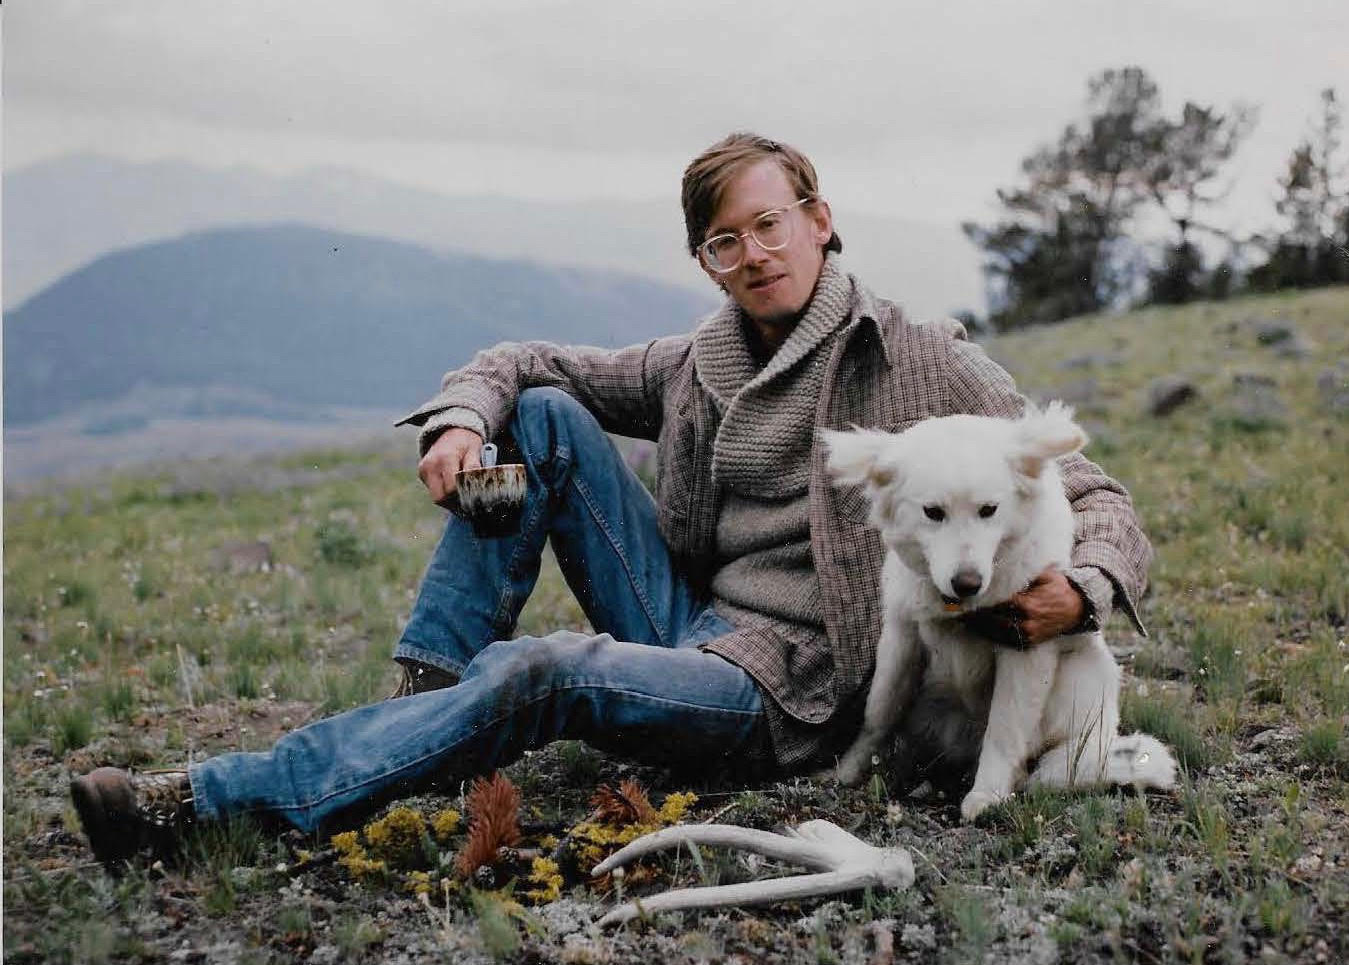 John sitting on a hill with his dog Pie, wearing wide-rimmed glasses, blue jeans, and boots.